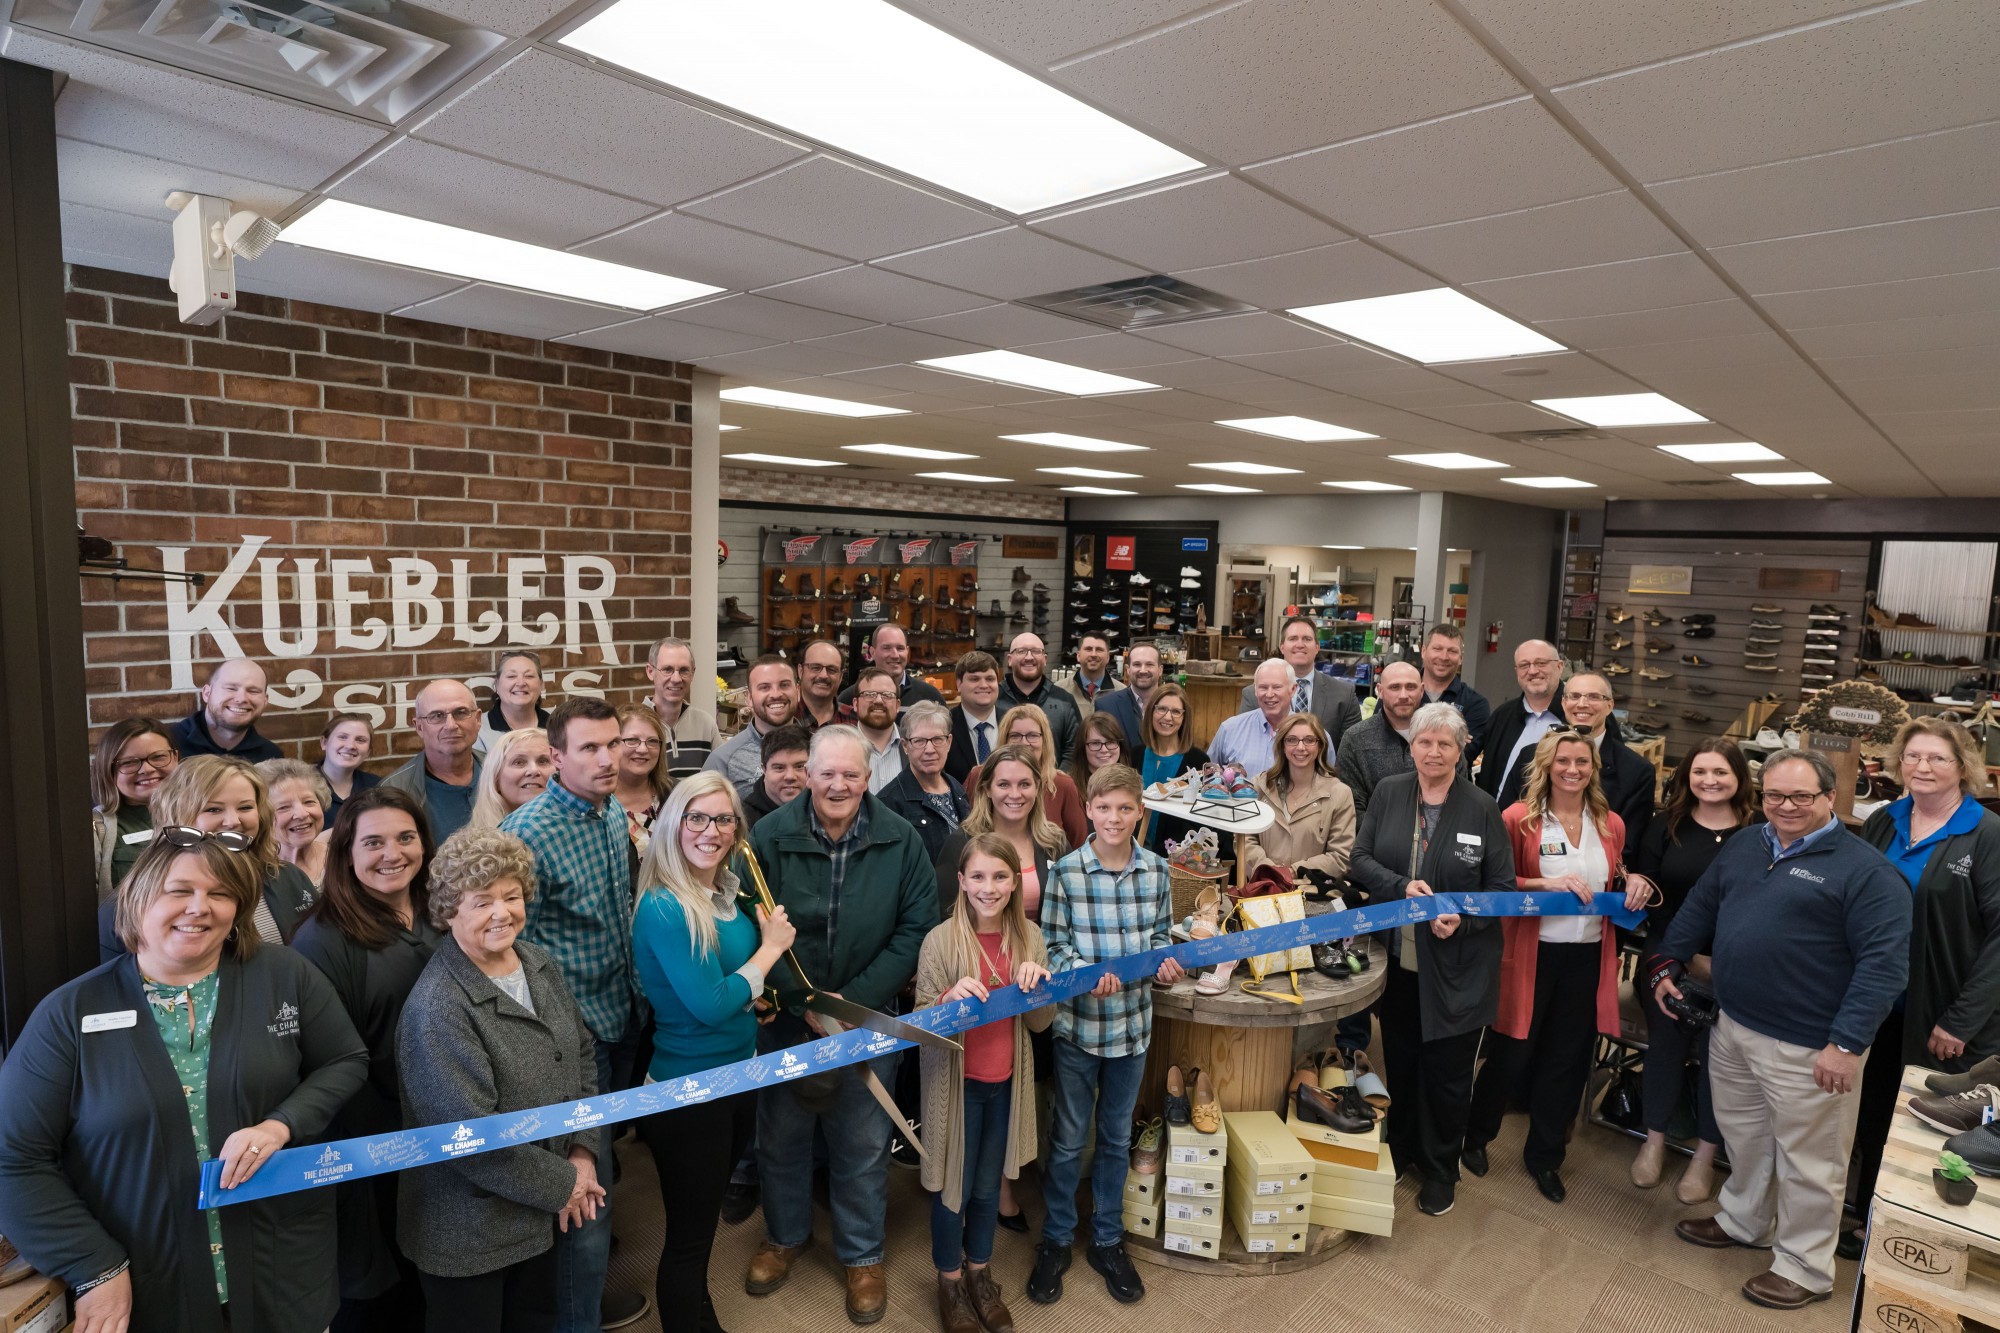 Kuebler Shoes Cuts Ribbon on New Location